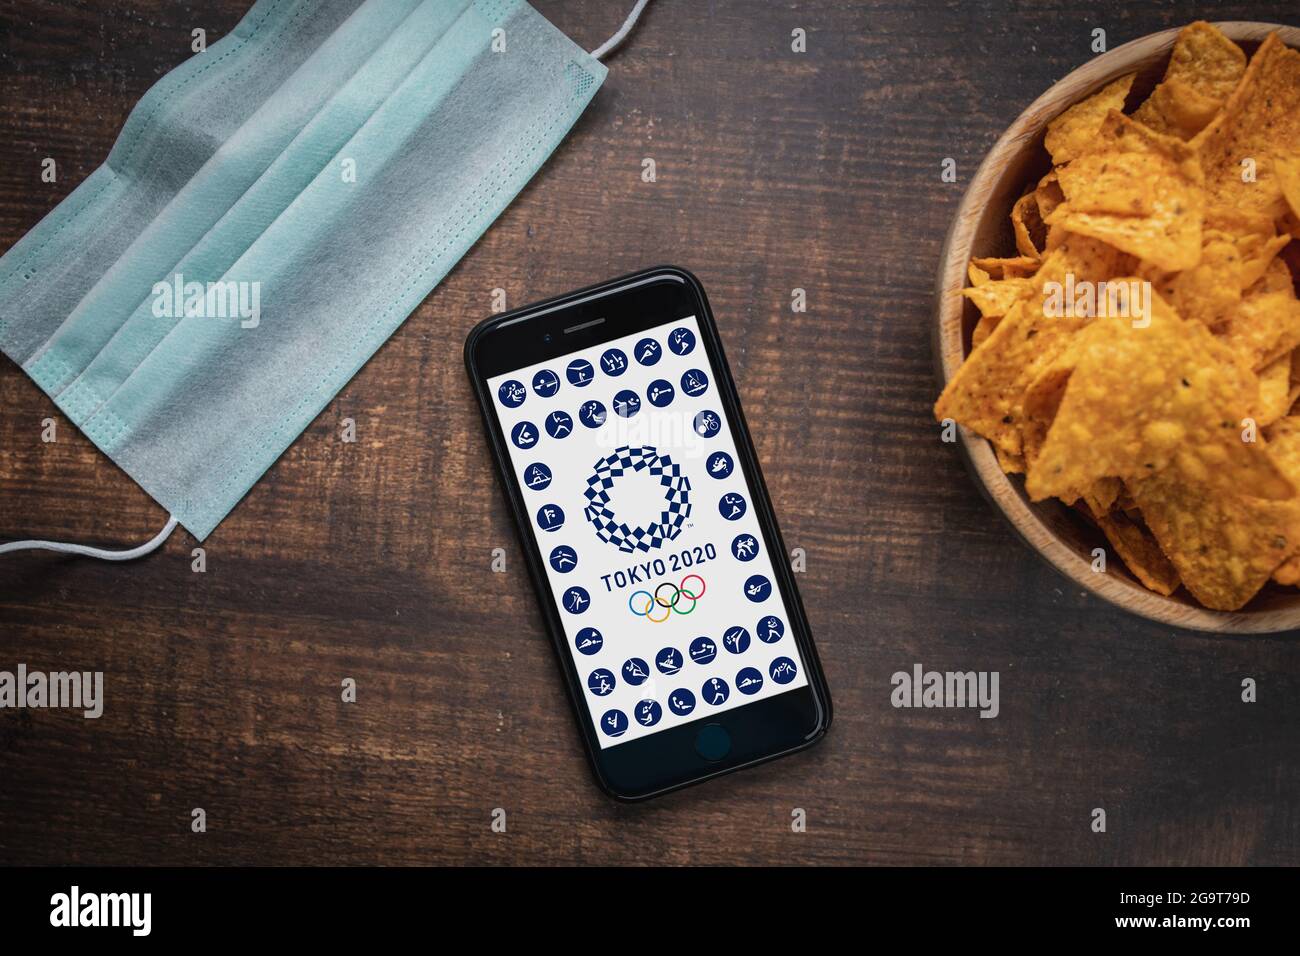 Antalya, Turkey - July 28, 2021: Cell phone showing Official logo of the Tokyo 2020 Summer Olympic Games Stock Photo